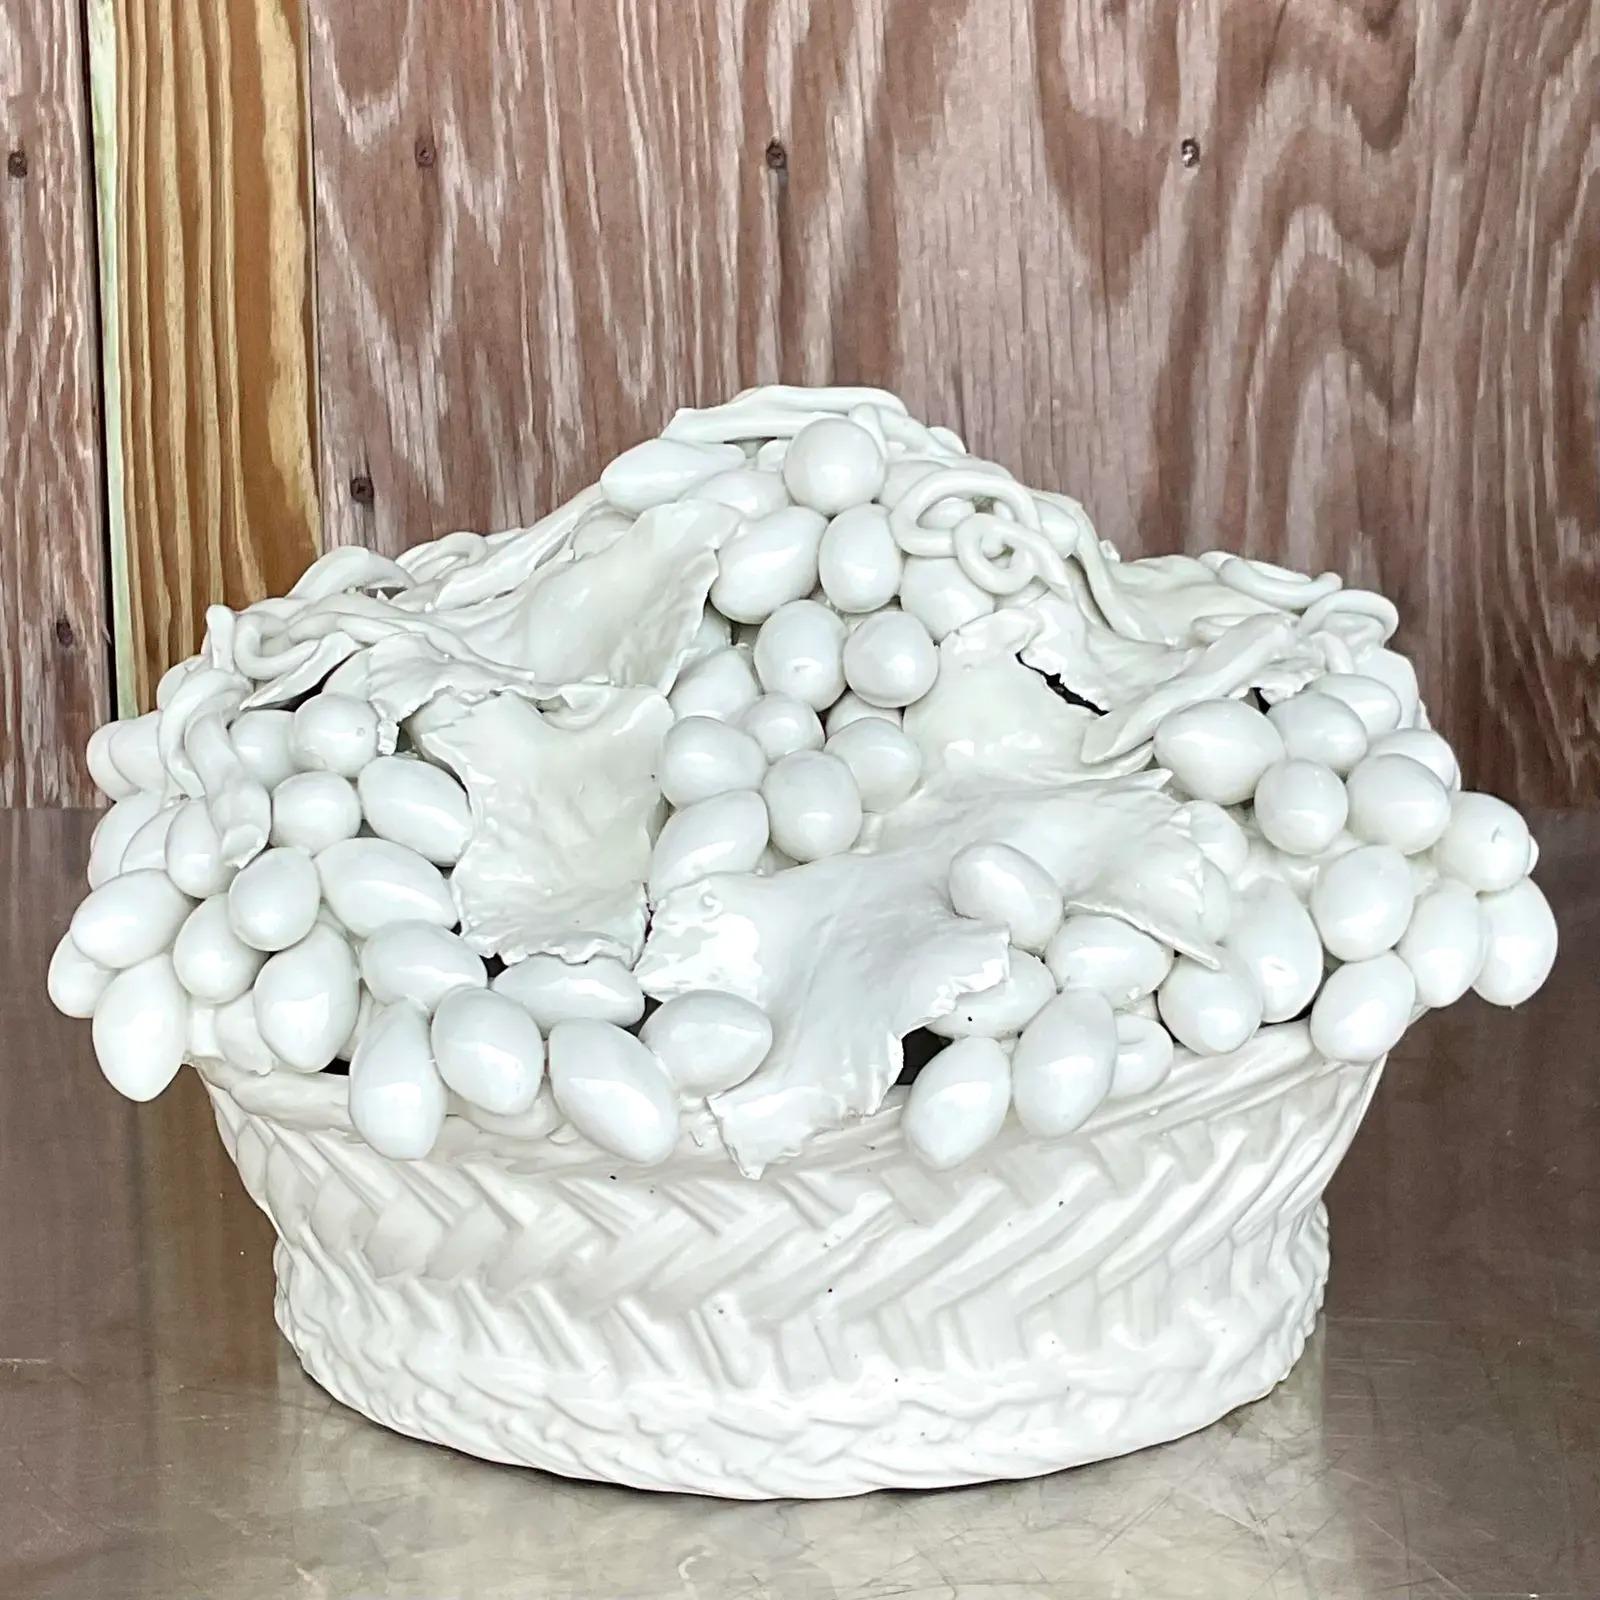 Gorgeous vintage Italian glazed ceramic fruit bowl. Made by the iconic Este group. Beautiful Blanc de Chine all white finish. Acquired from a Palm Beach estate.